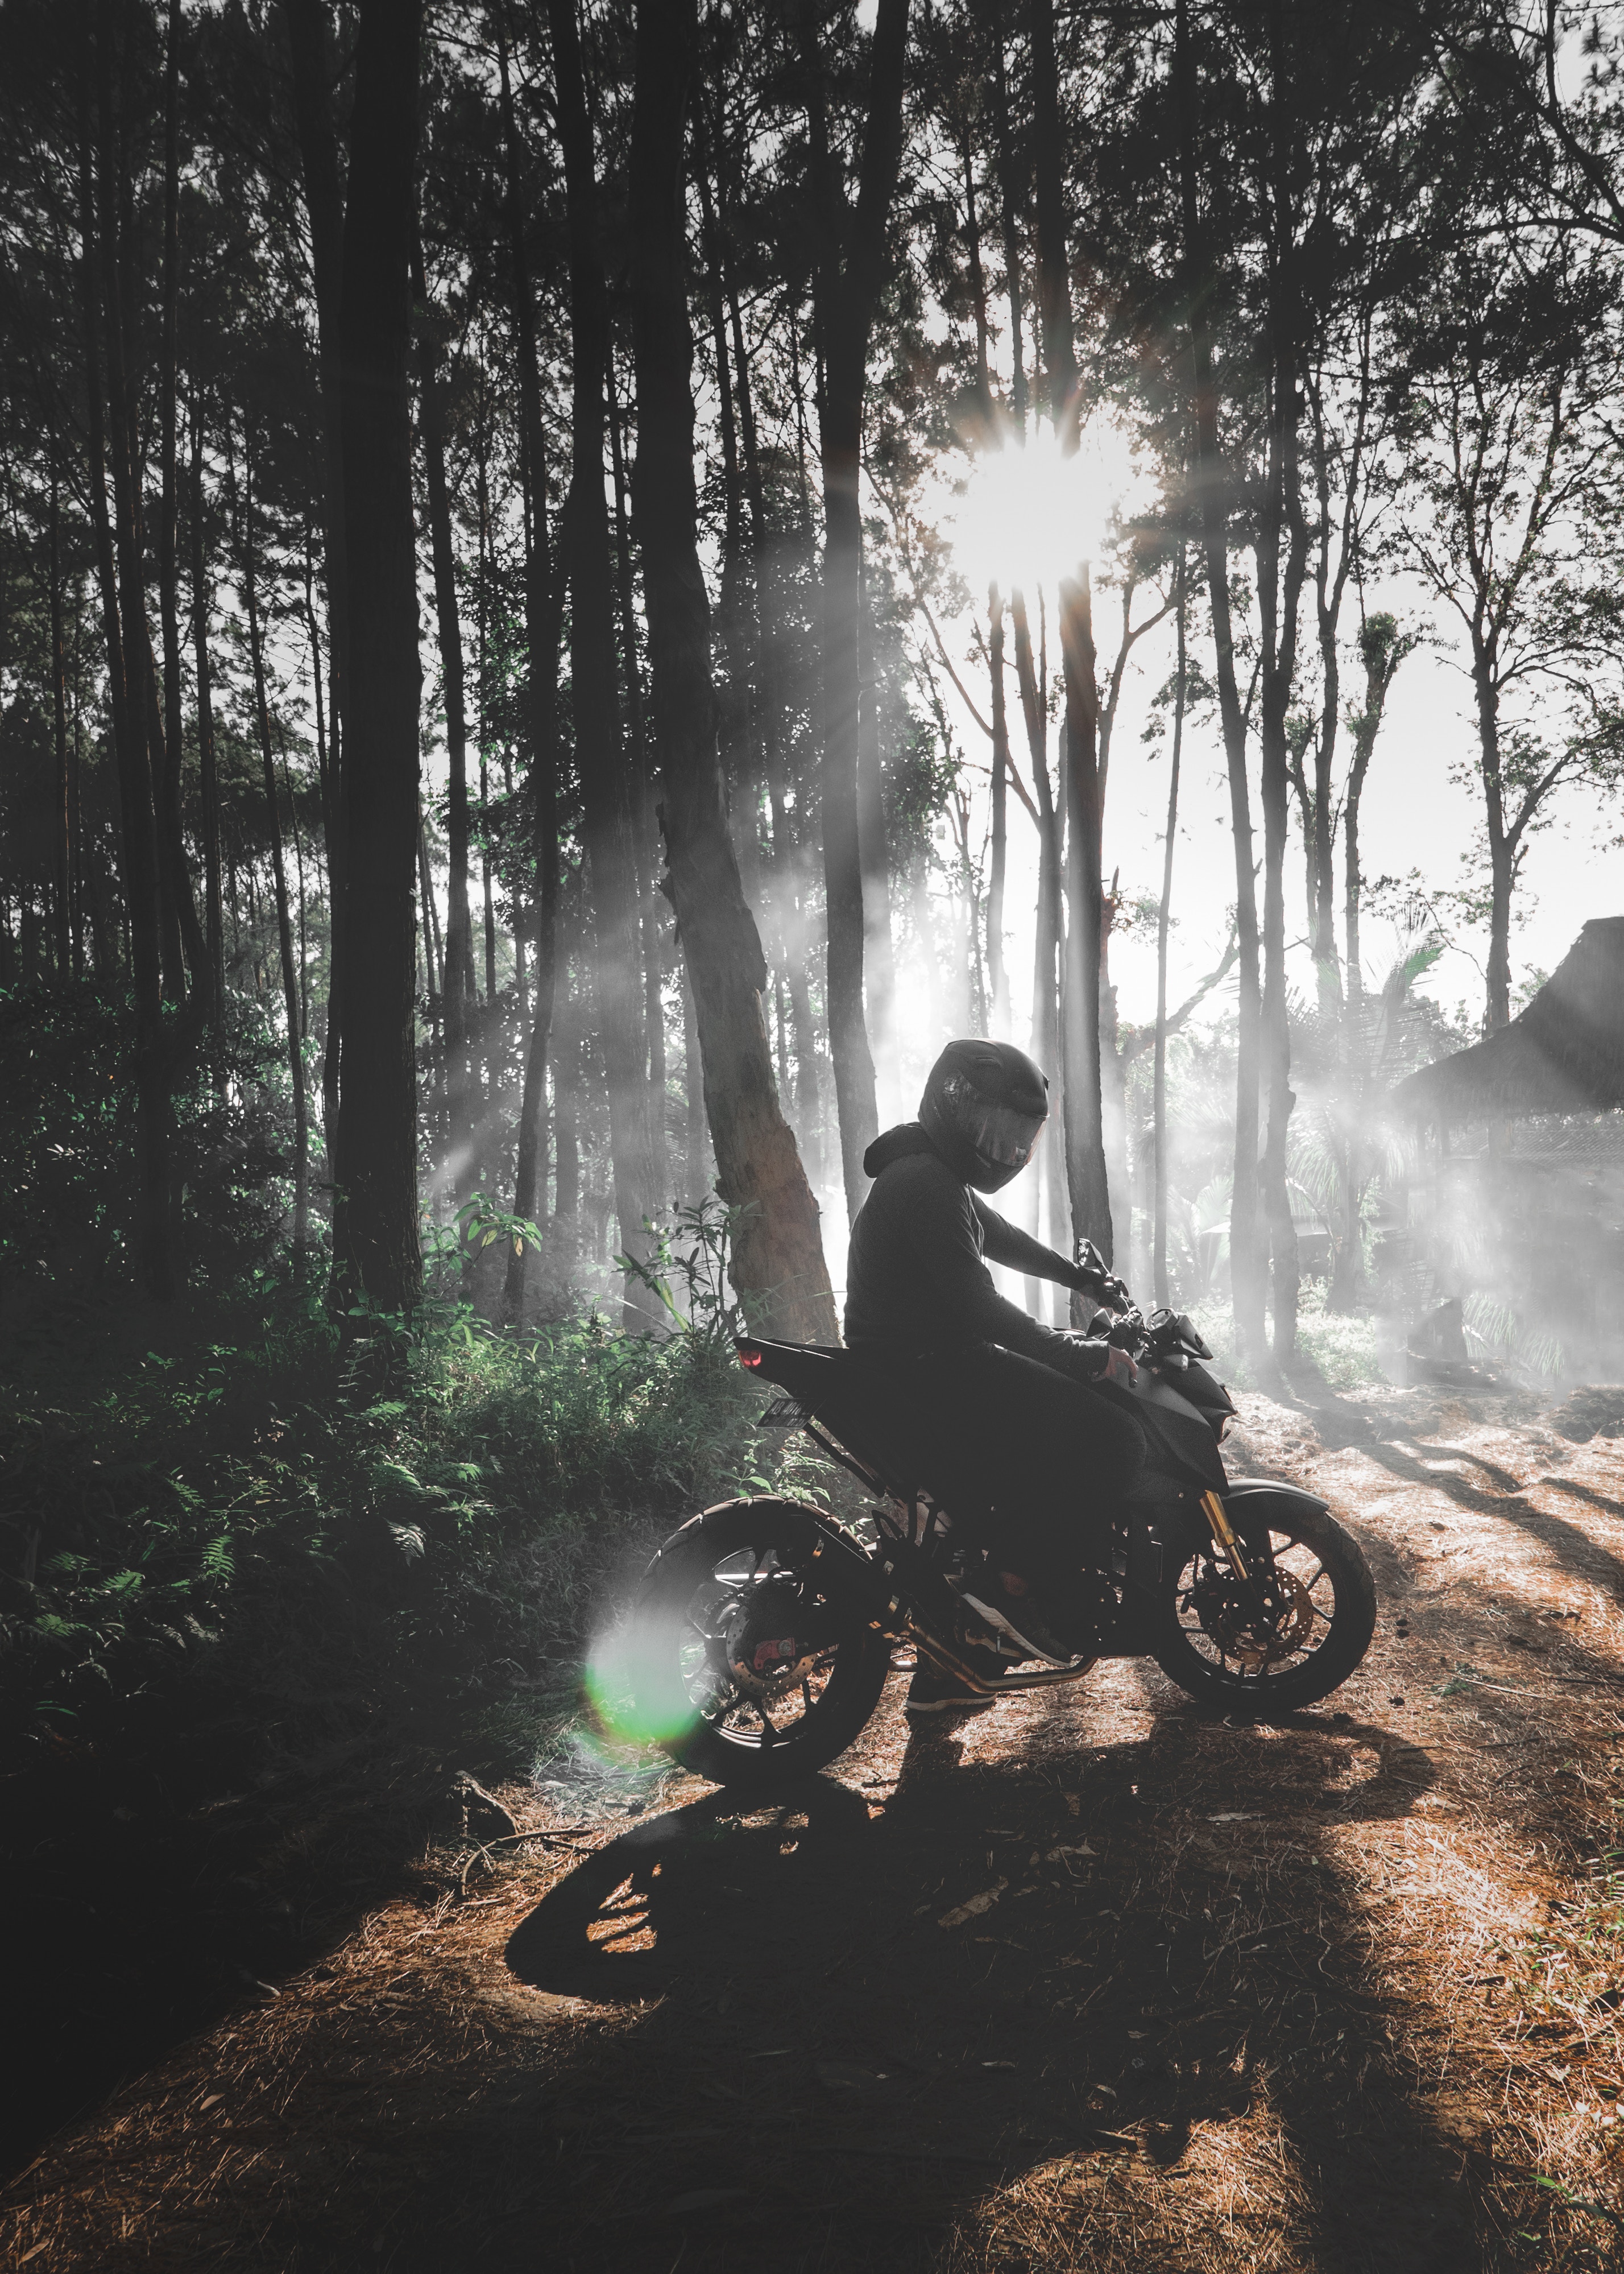 motorcyclist, bike, motorcycles, forest, fog, motorcycle